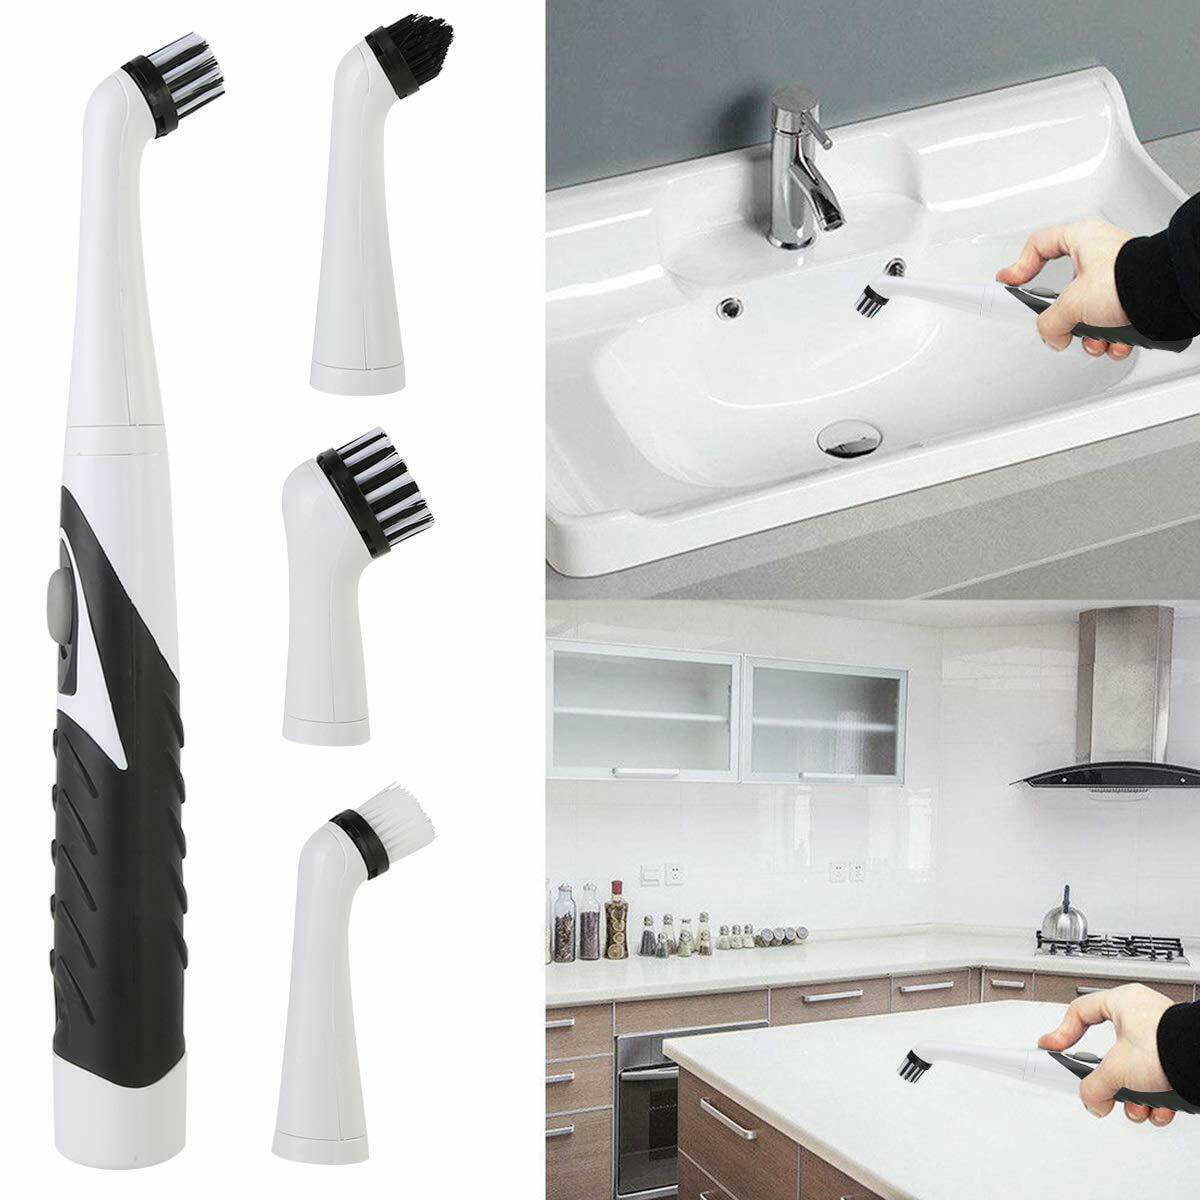 4in1 Super Sonic Scrubber Cleaning Electric Brush House Kitchen&Bathroom Helper